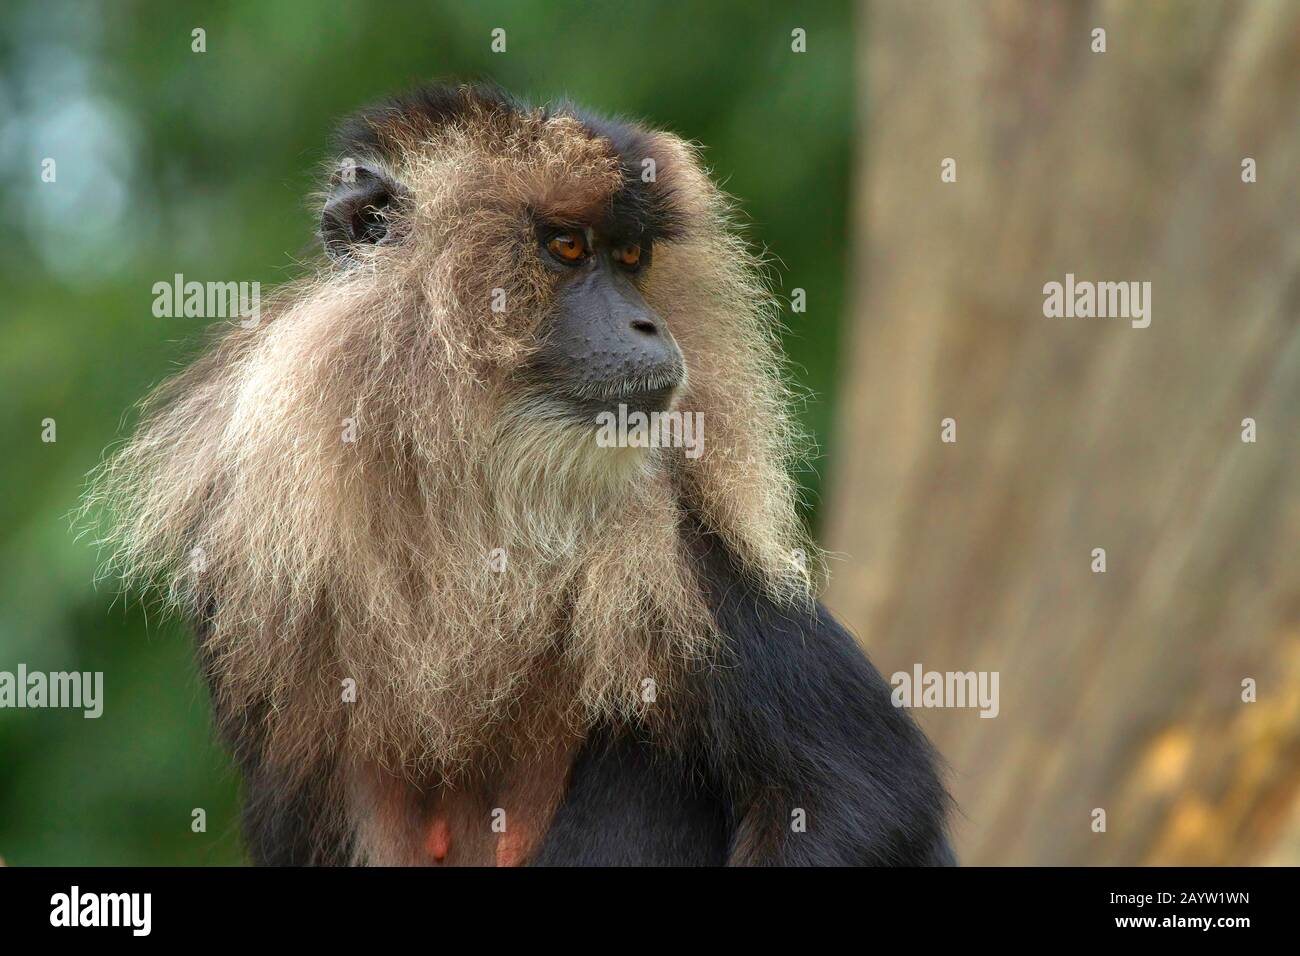 liontail macaque, lion-tailed macaque (Macaca silenus), portrait, Asia Stock Photo